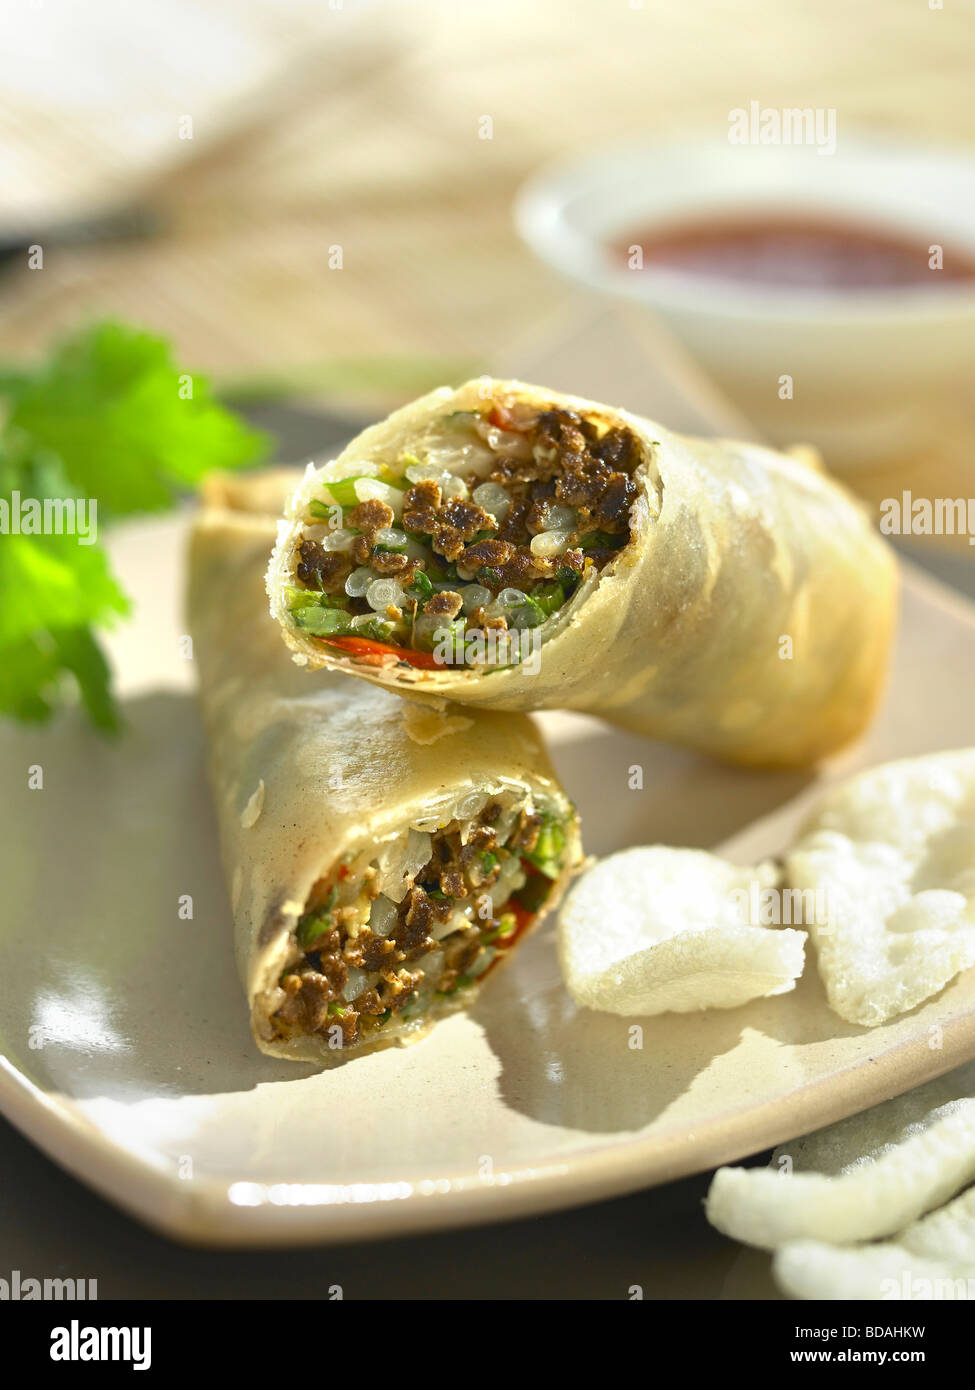 Vegetariano spring roll Foto Stock